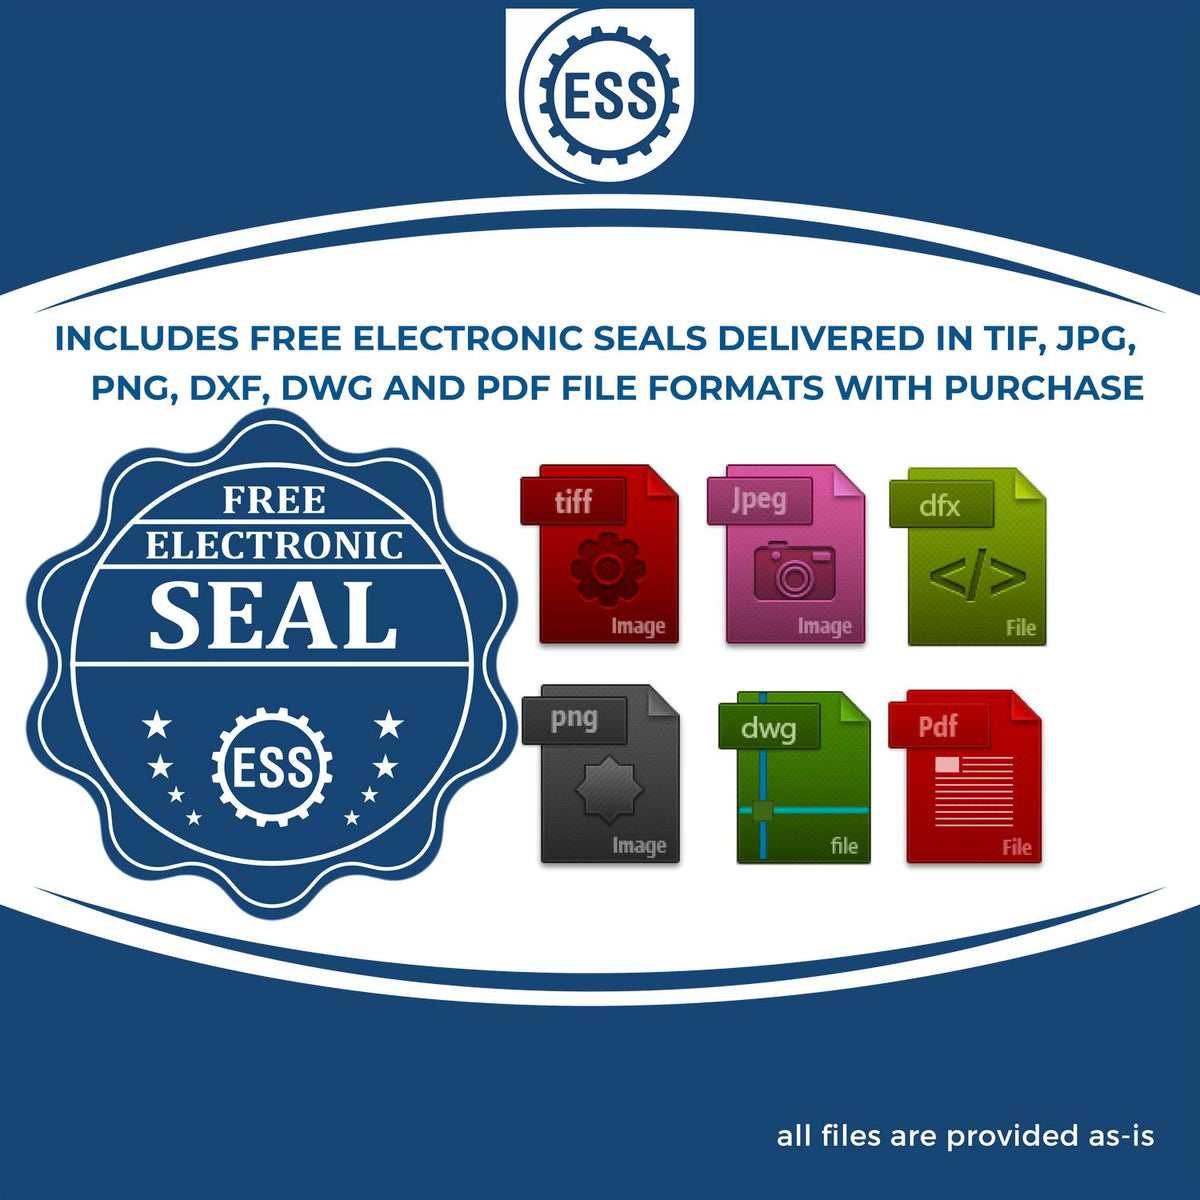 An infographic for the free electronic seal for the Heavy Duty Cast Iron Oklahoma Architect Embosser illustrating the different file type icons such as DXF, DWG, TIF, JPG and PNG.